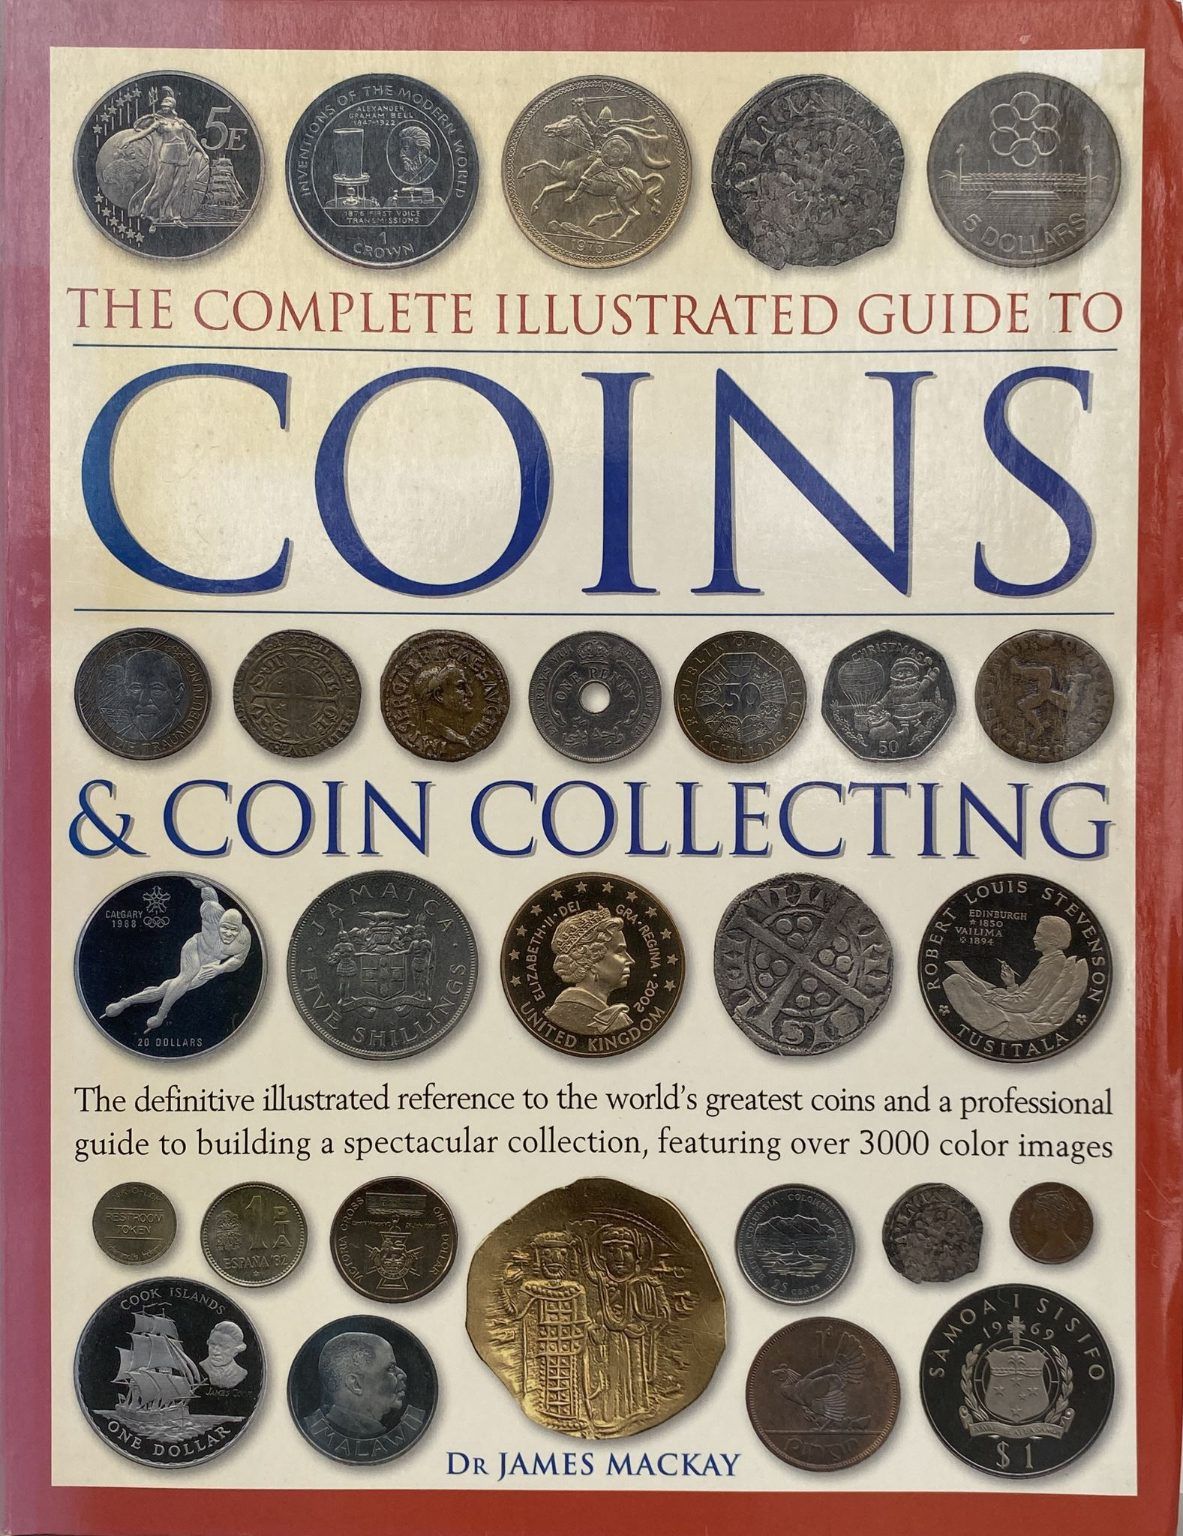 THE COMPLETE ILLUSTRATED GUIDE TO COINS AND COIN COLLECTING